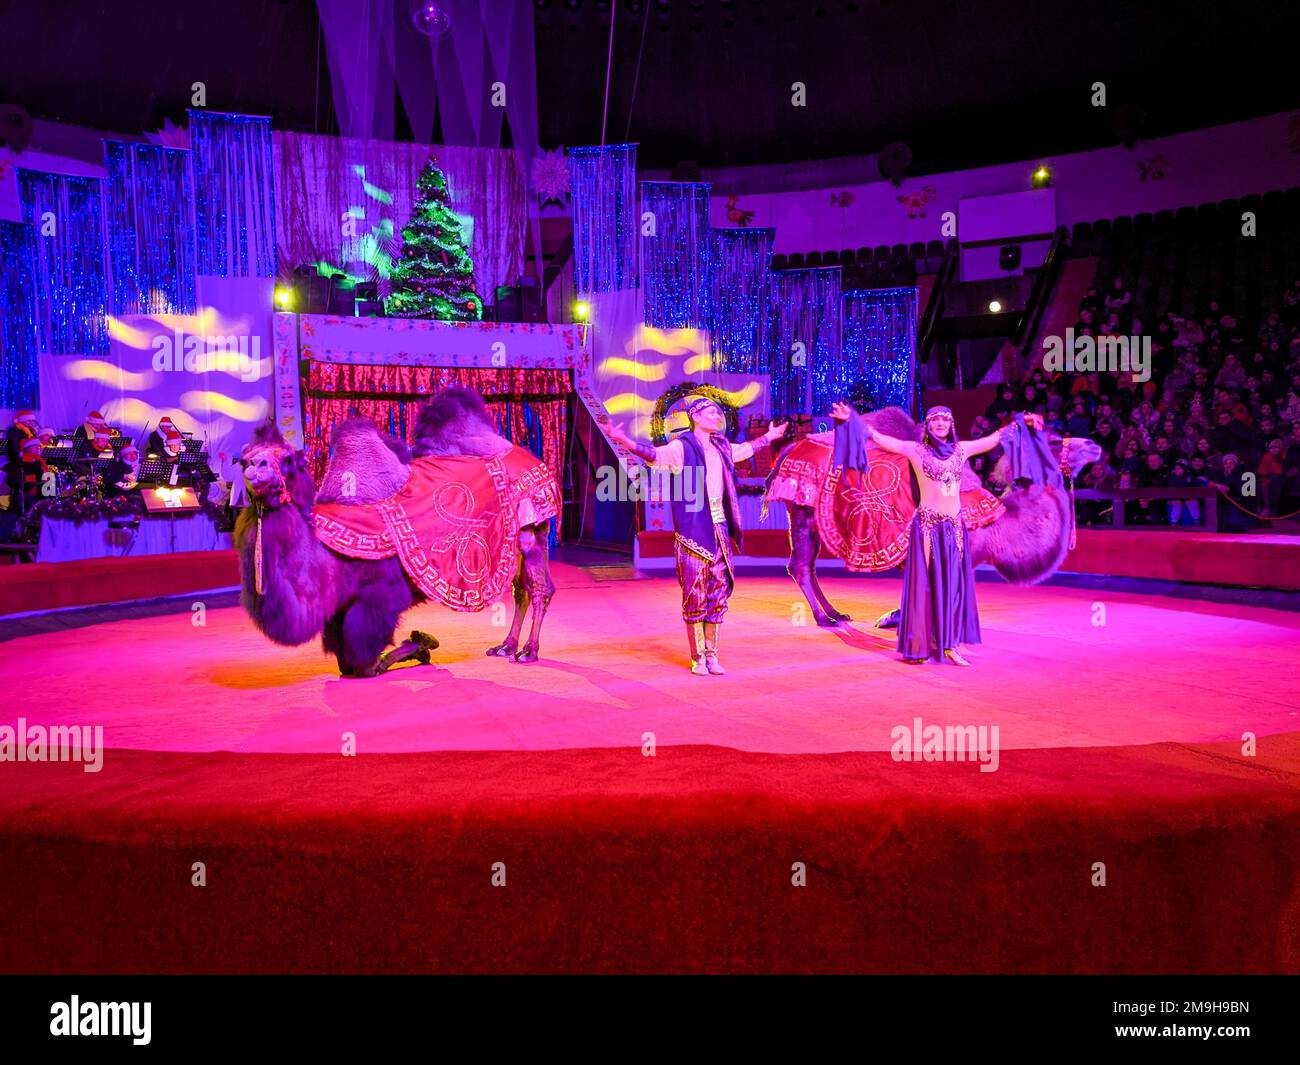 Camels kneel in the circus arena, animals participate in the show along with trainers. Stock Photo